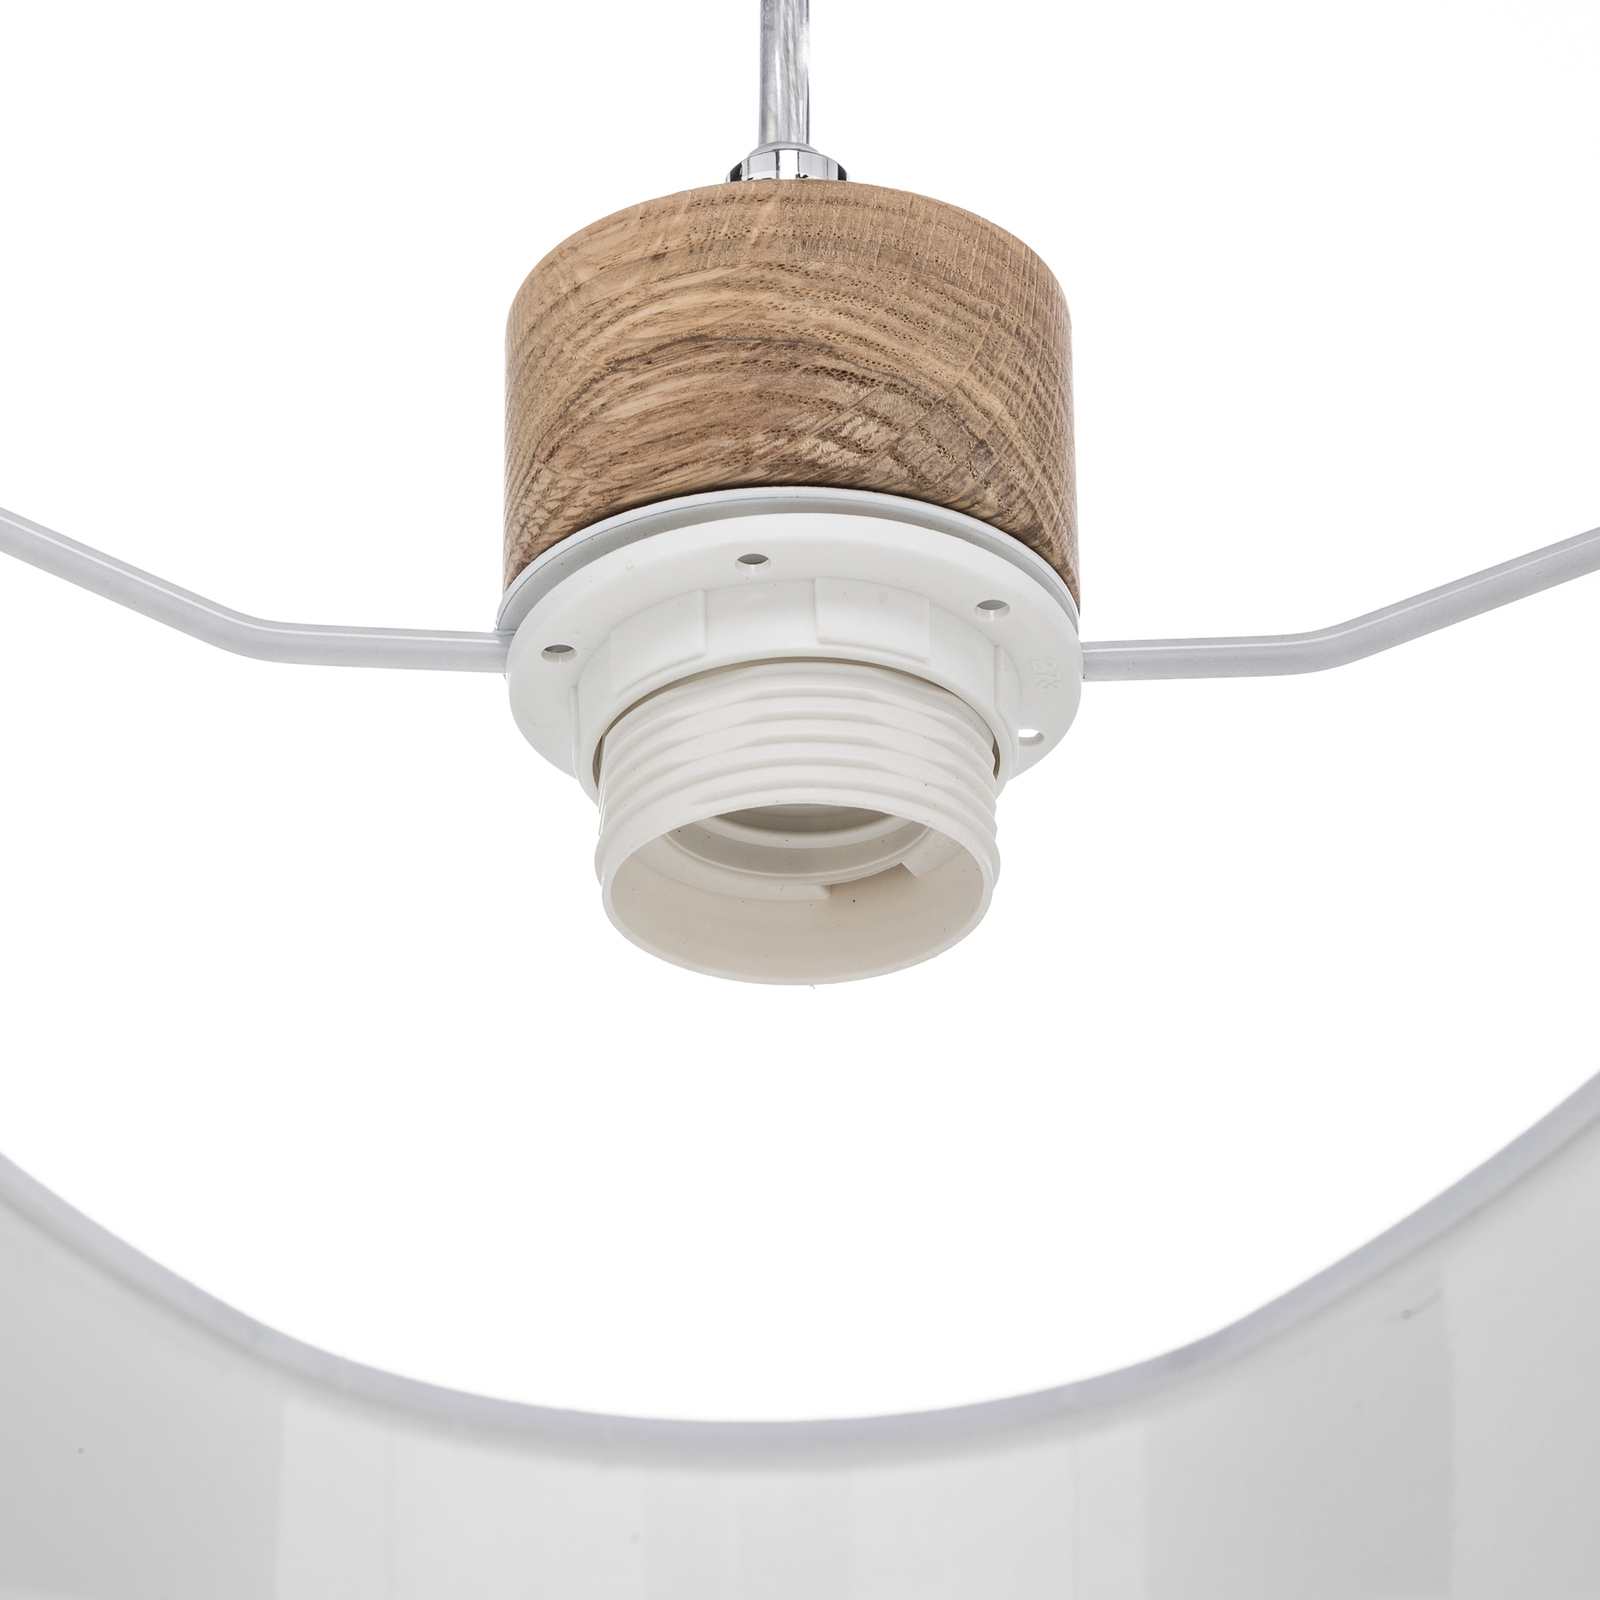 Cassy hanging light with a white fabric lampshade